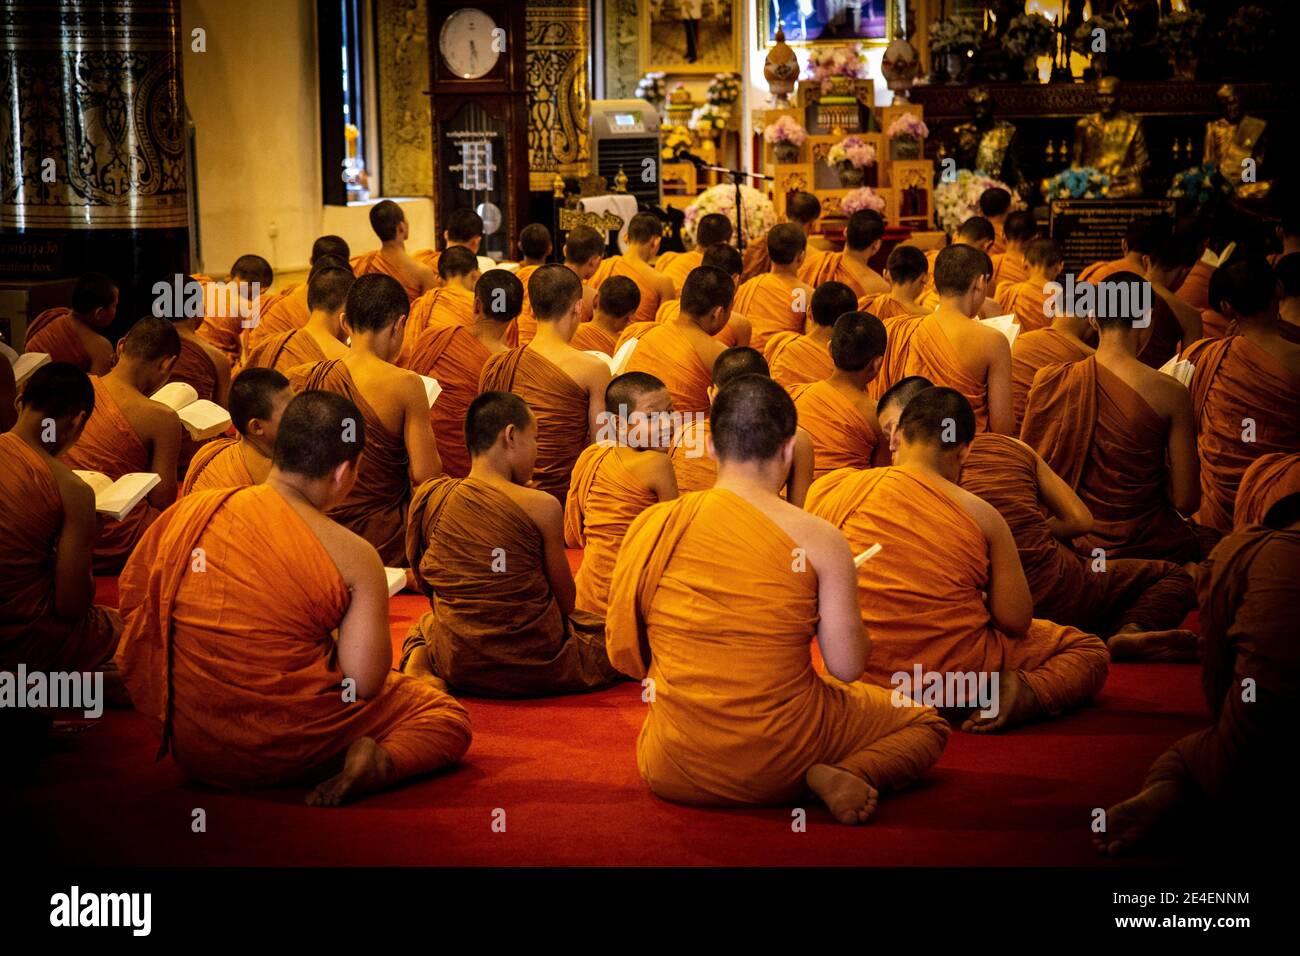 Young monks praying in temple in Thailand Stock Photo